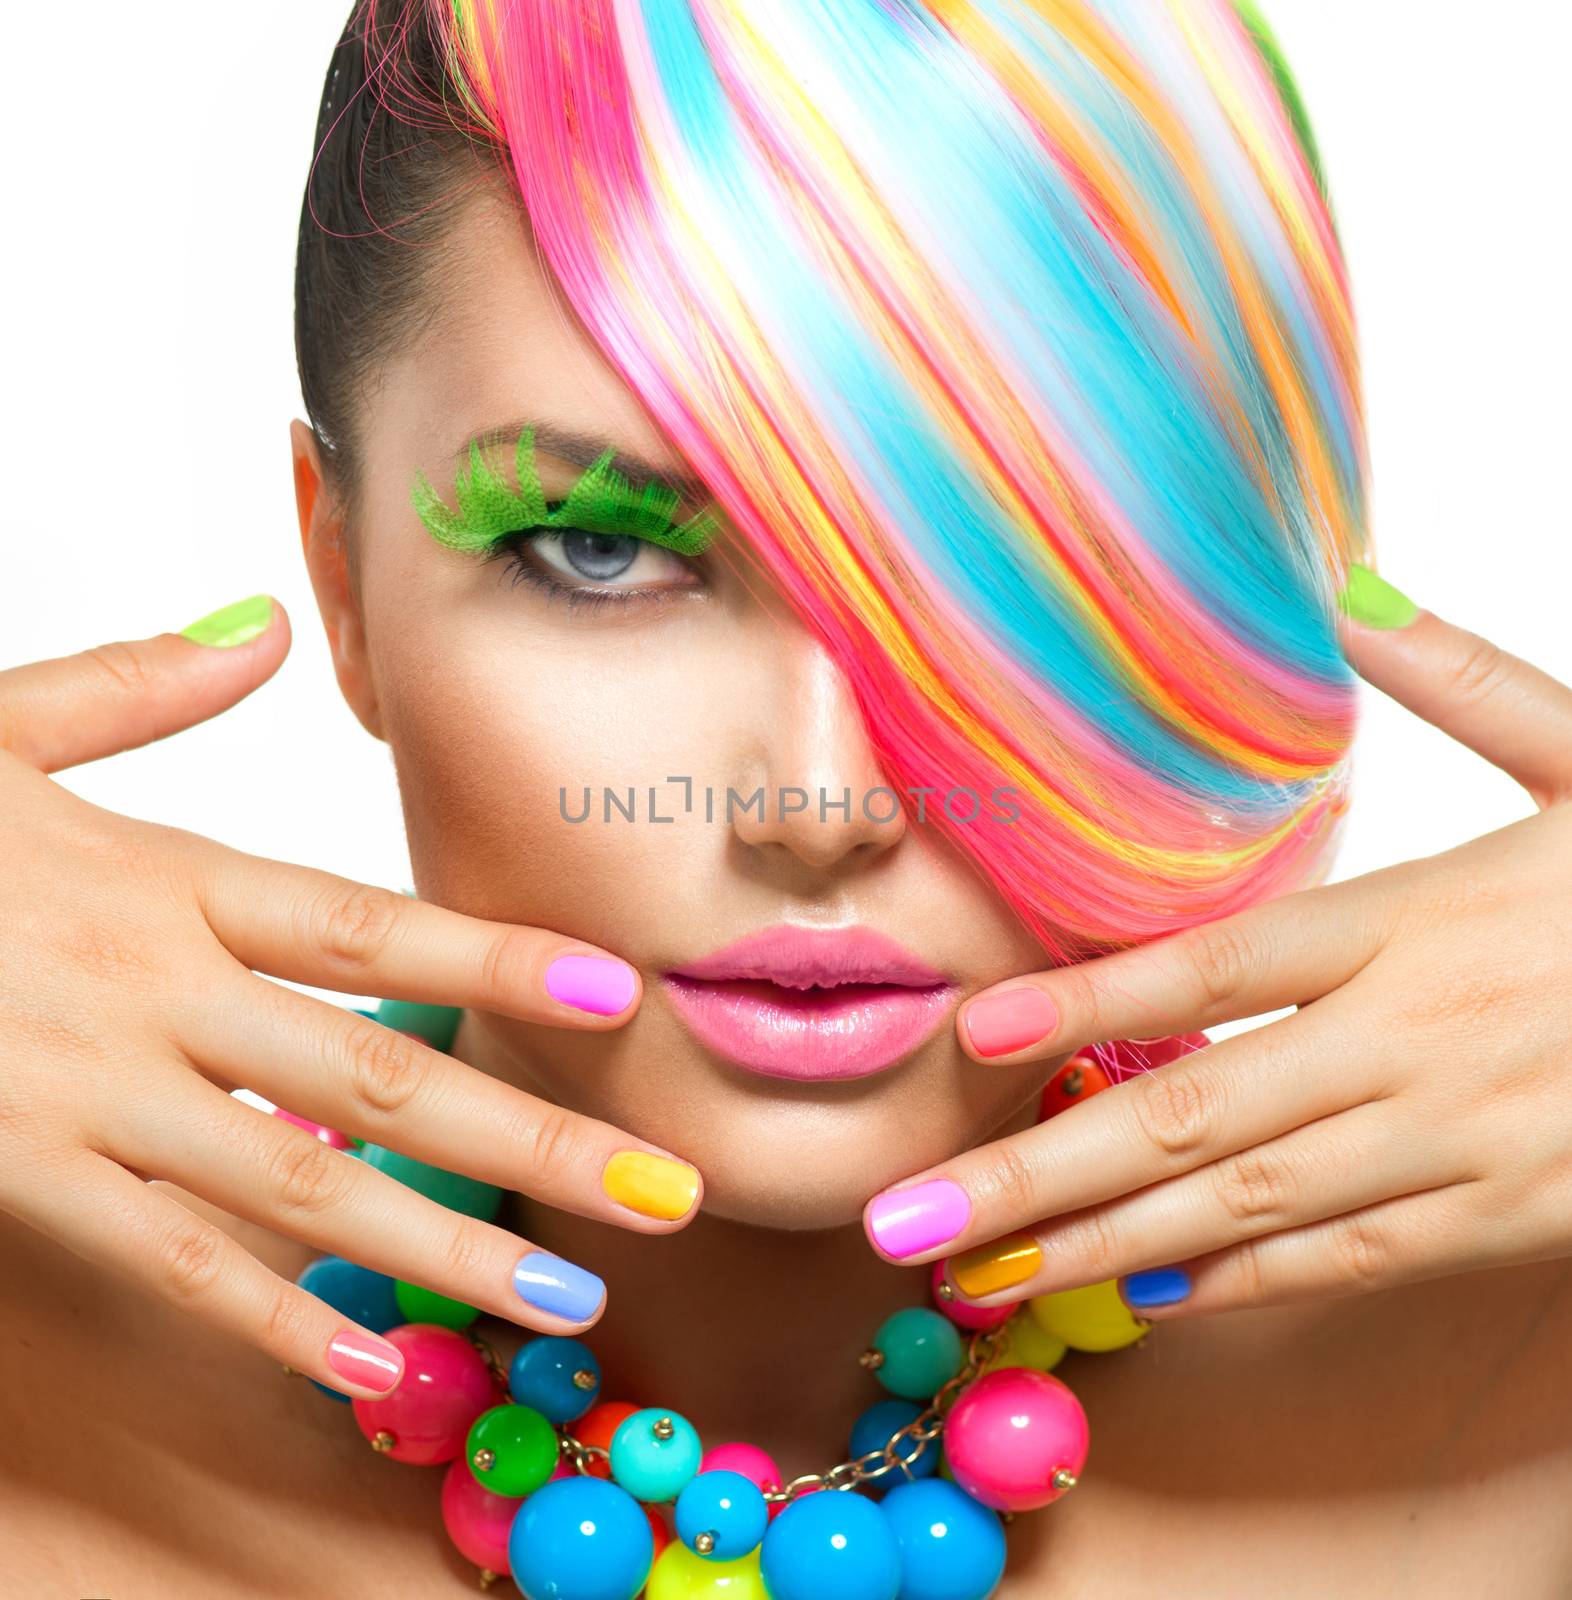 Beauty Girl Portrait with Colorful Makeup, Hair and Accessories by SubbotinaA